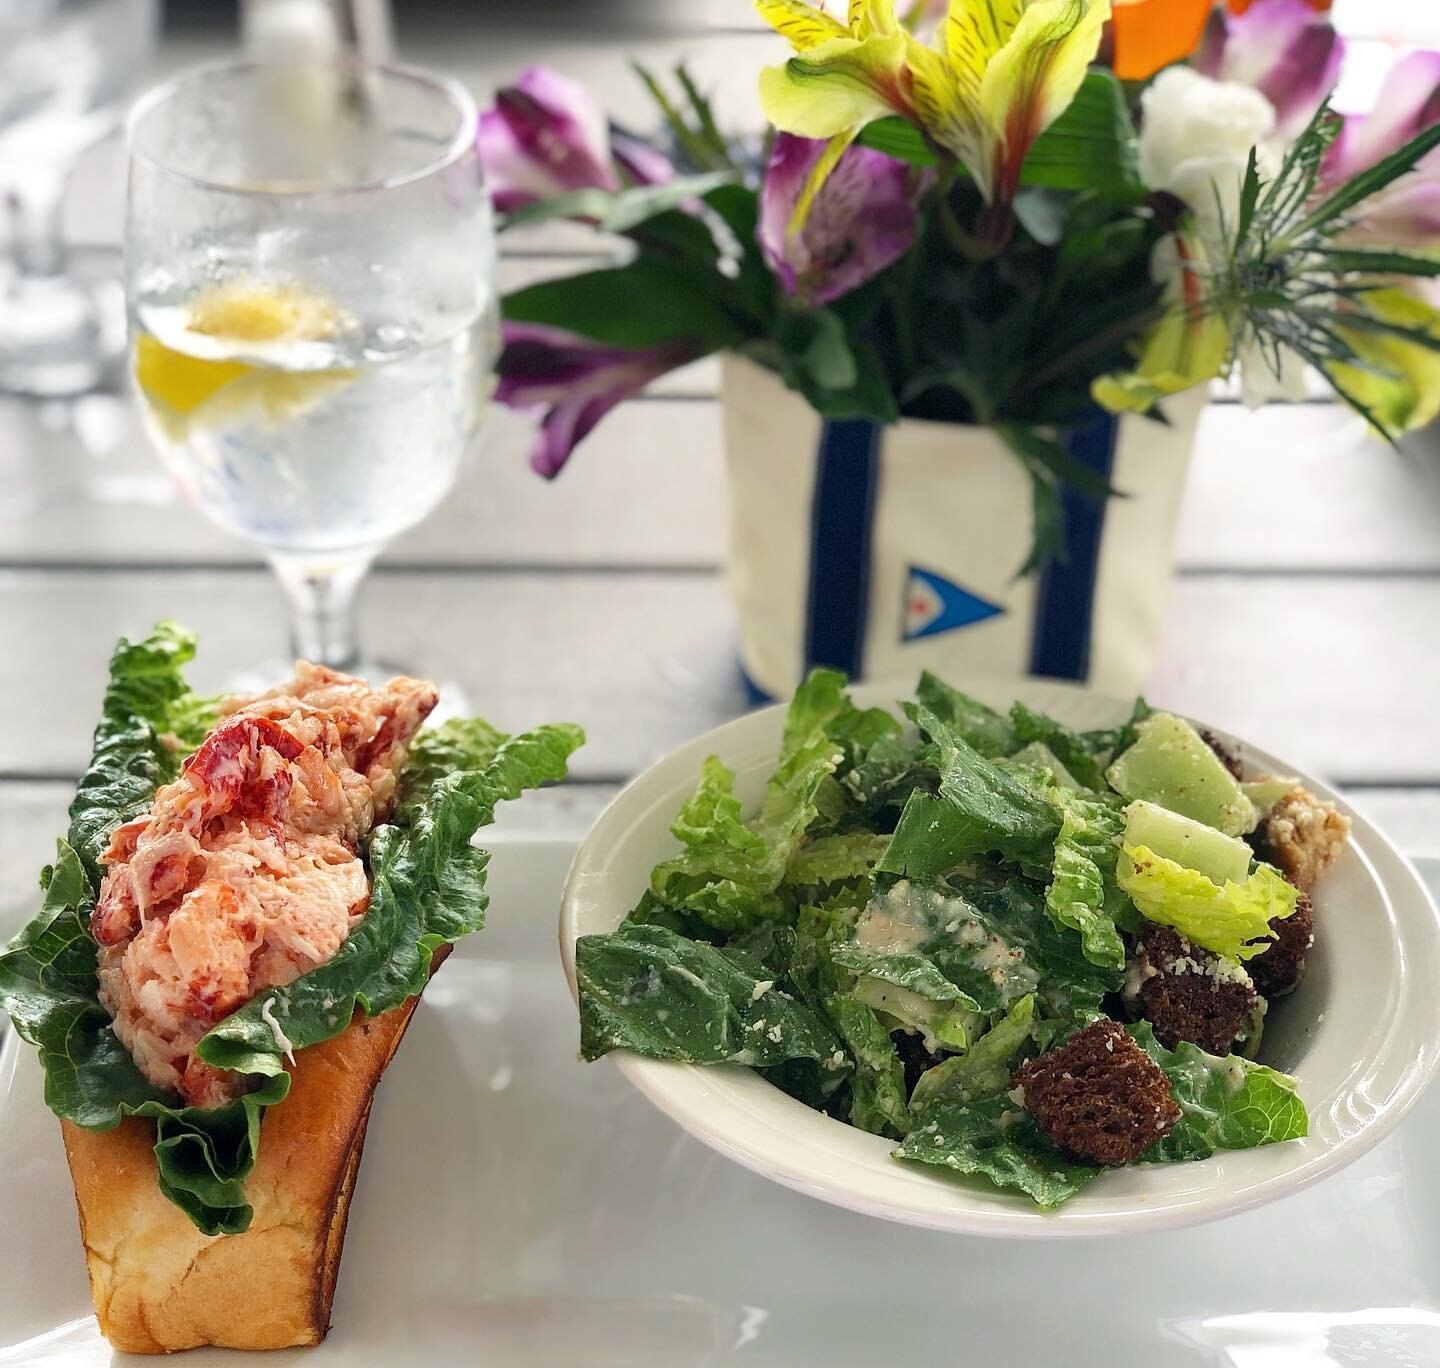 Nothing says summer like a &hellip; Lobster roll + caesar salad. Lunchtime at the marina, watching the sailboats come in and out and savoring every sweet bite🦞⛵️